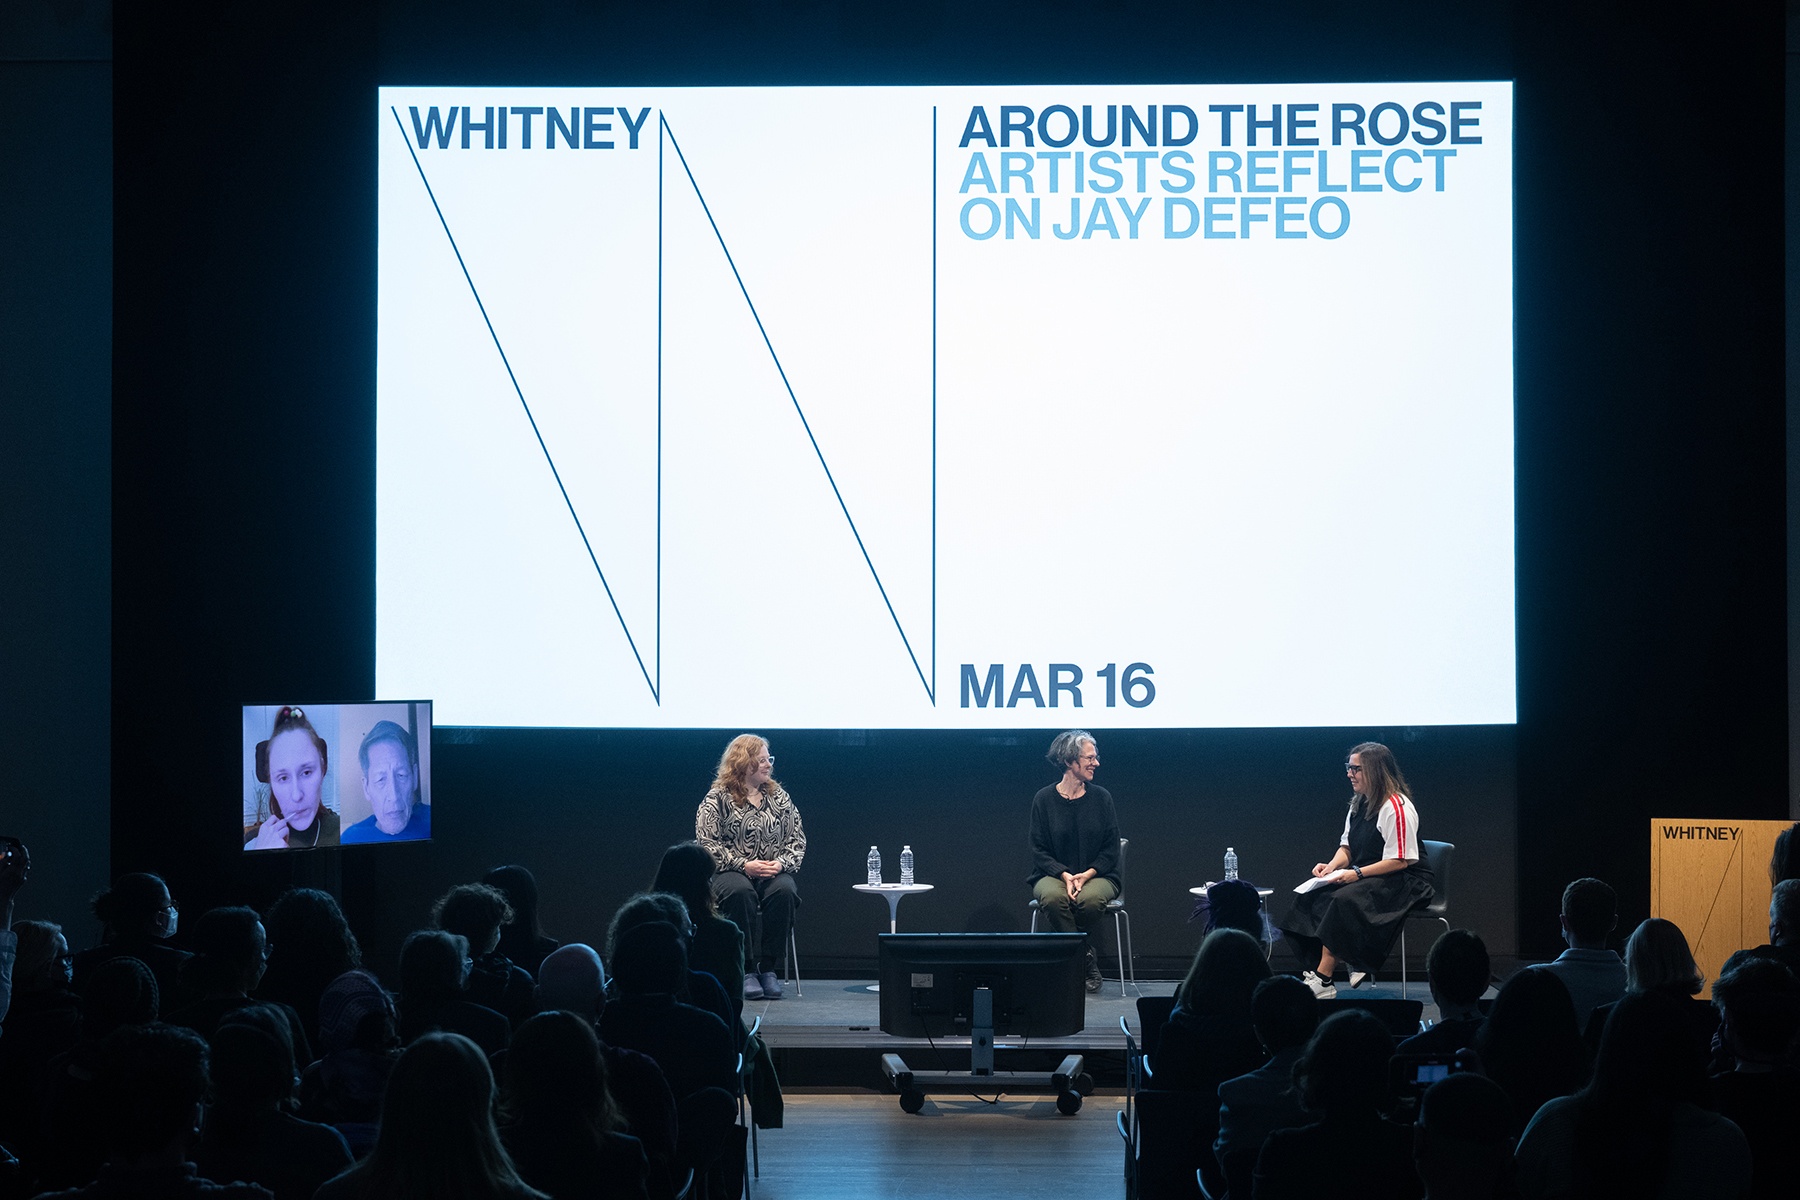 Video of Around The Rose: Artists Reflect on Jay DeFeo – Hosted by The Whitney